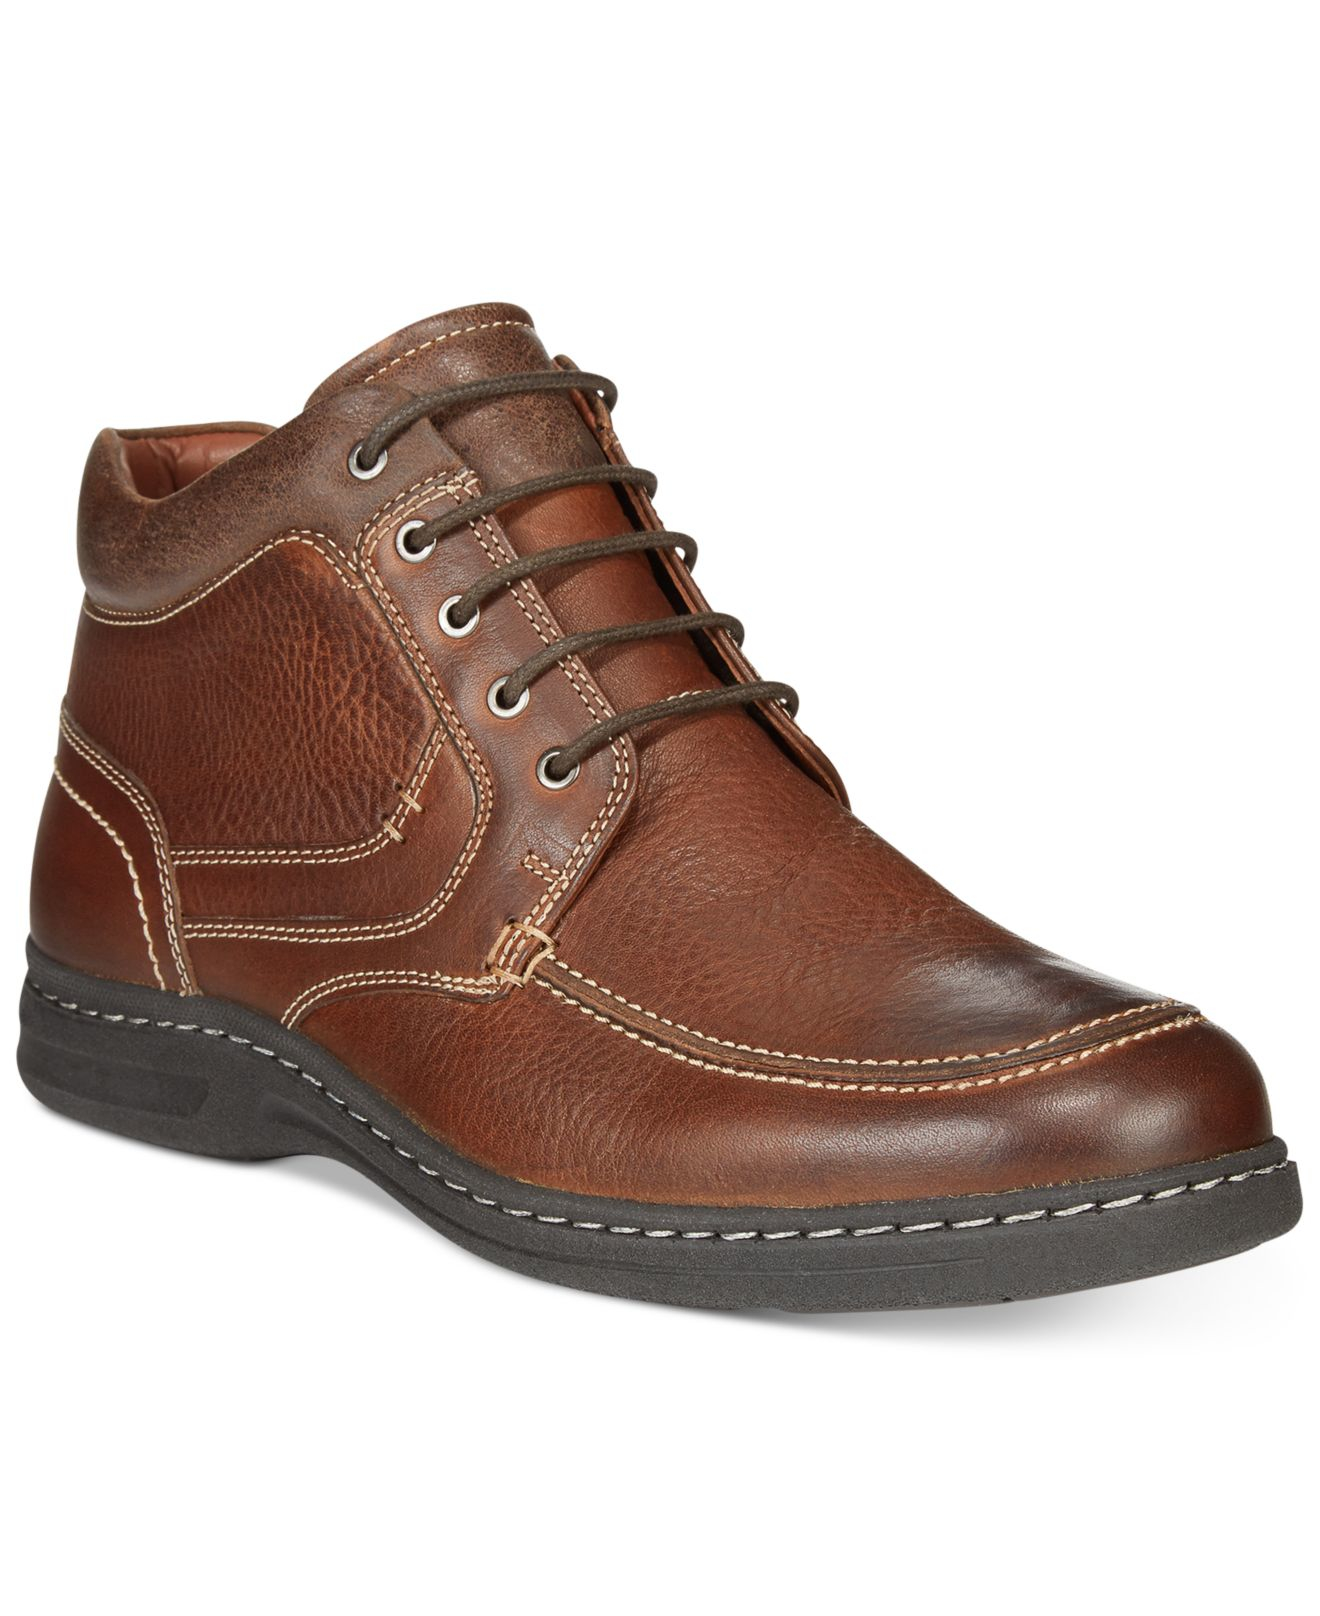 Johnston & Murphy Leather Mccarter Moc Toe Boots in Brown for Men - Lyst